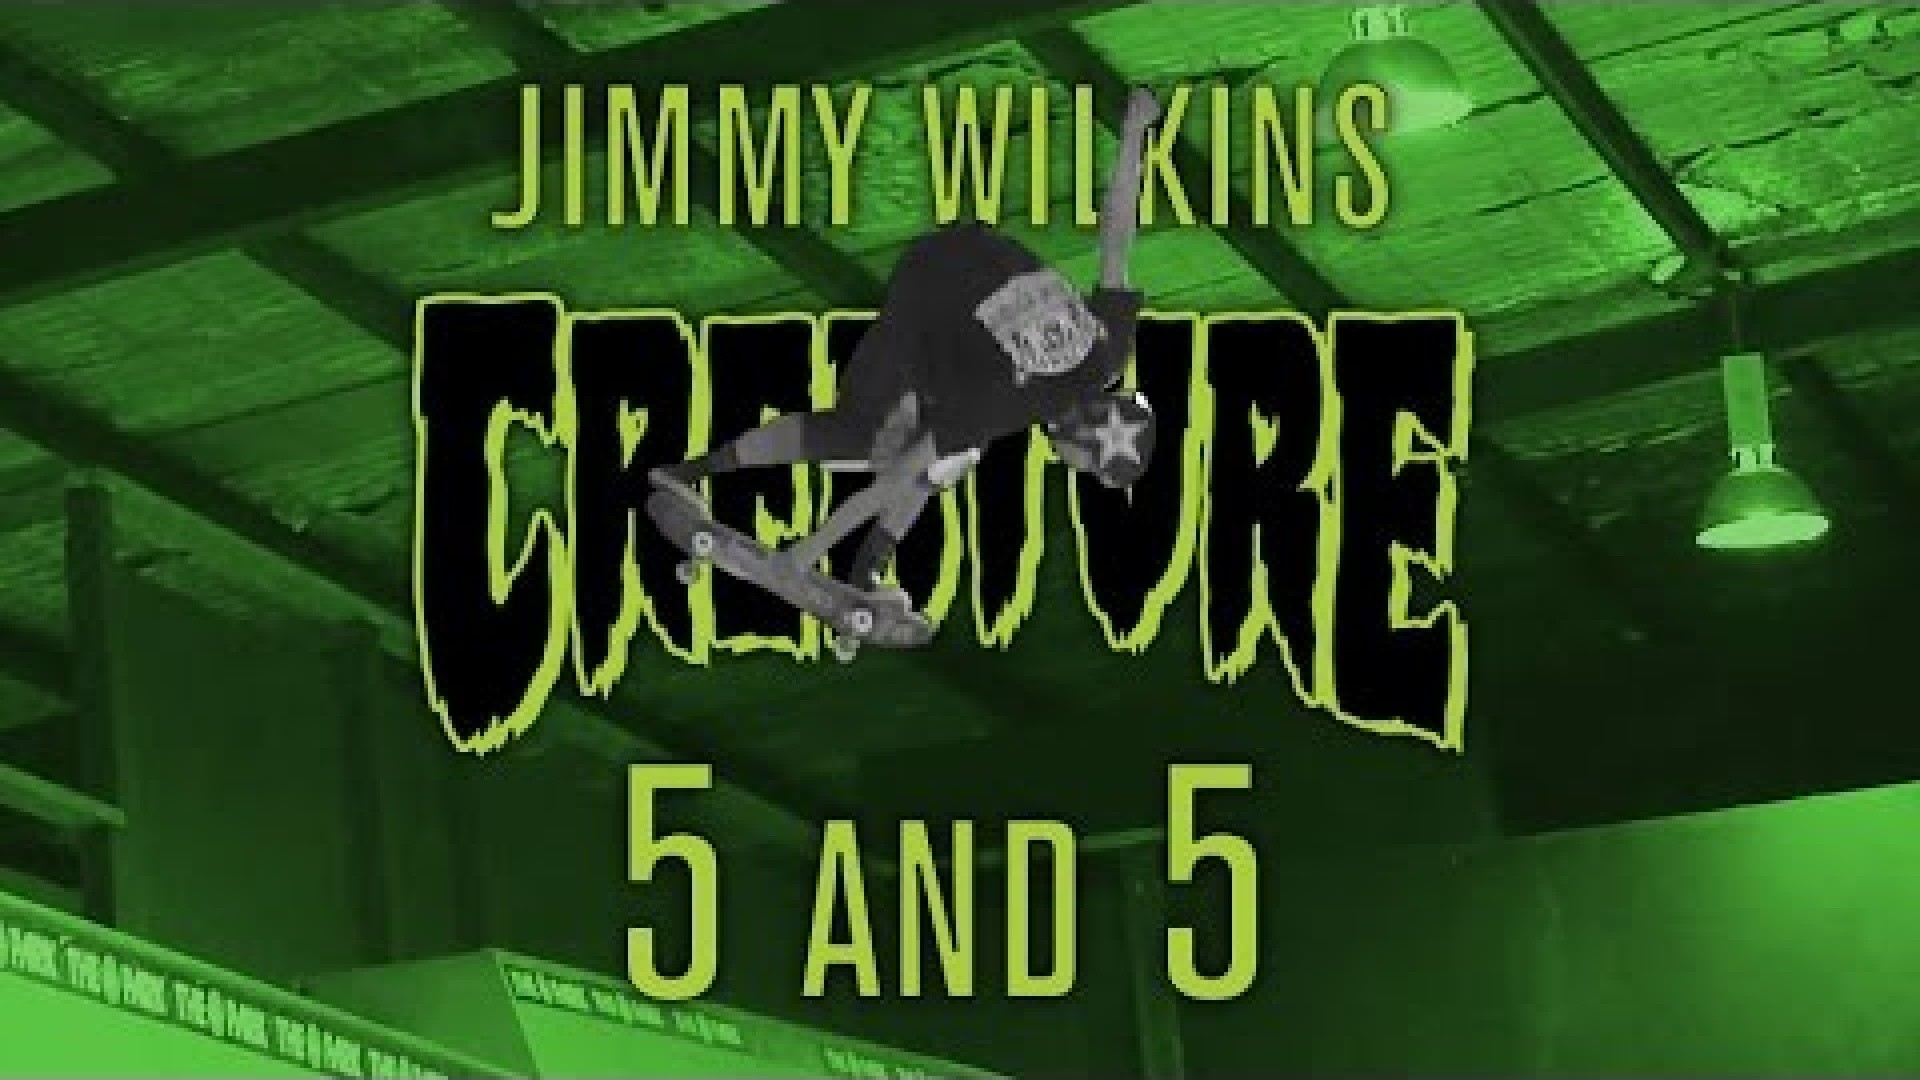 1920x1080 Jimmy Wilkins Creature 5 and 5